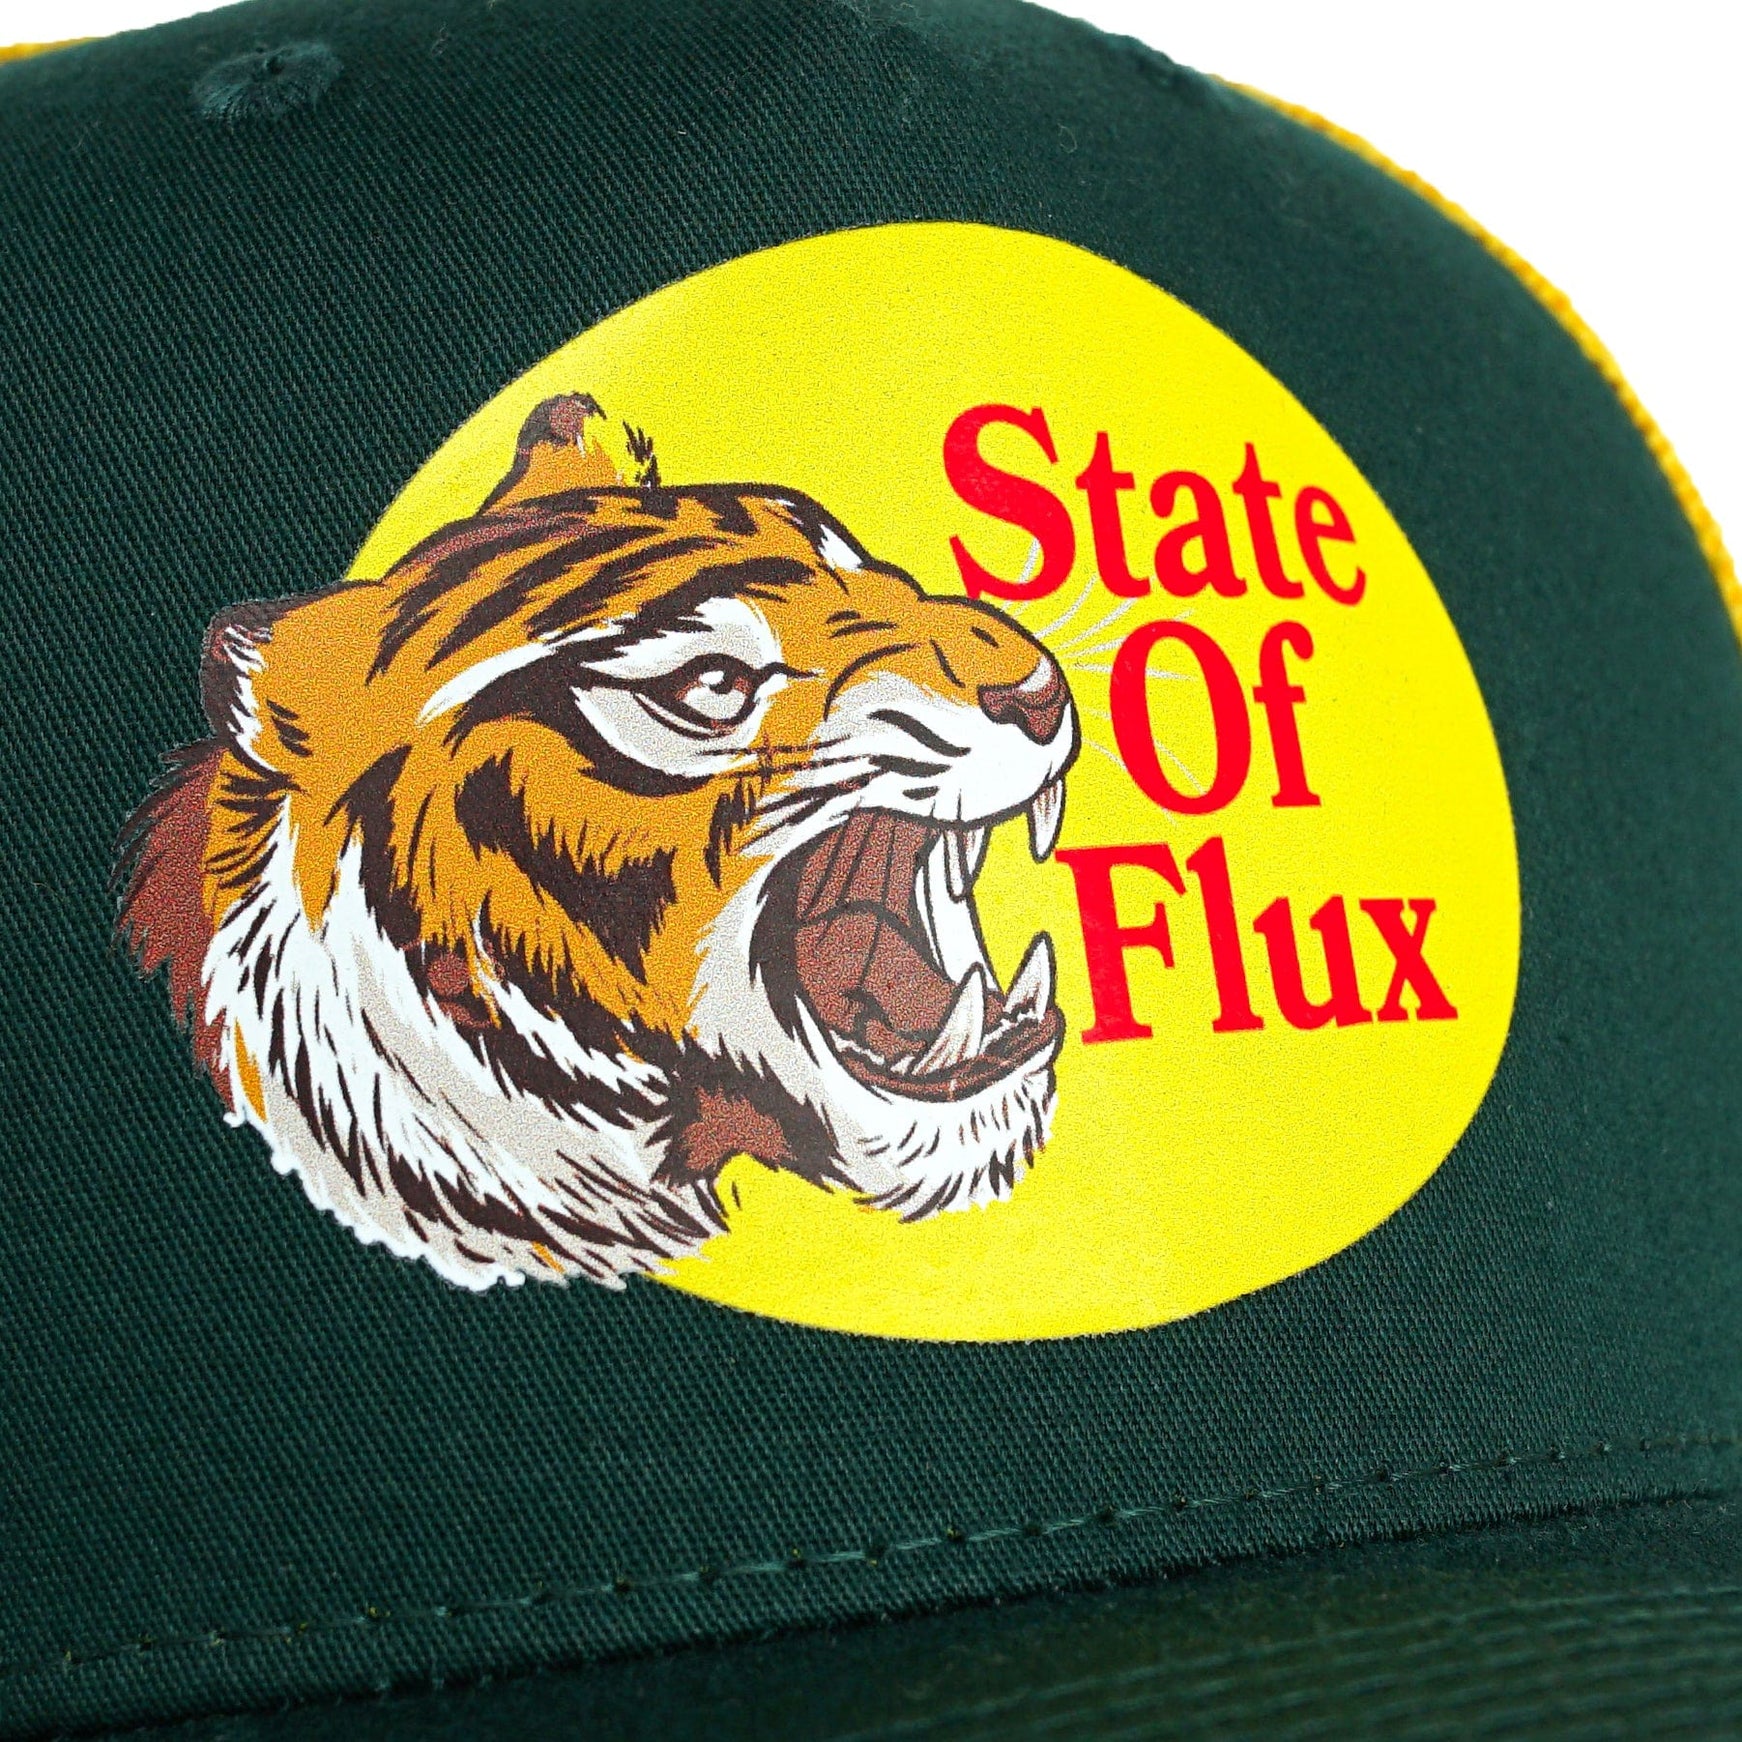 Tiger Pro Trucker Hat in forest green and dandelion